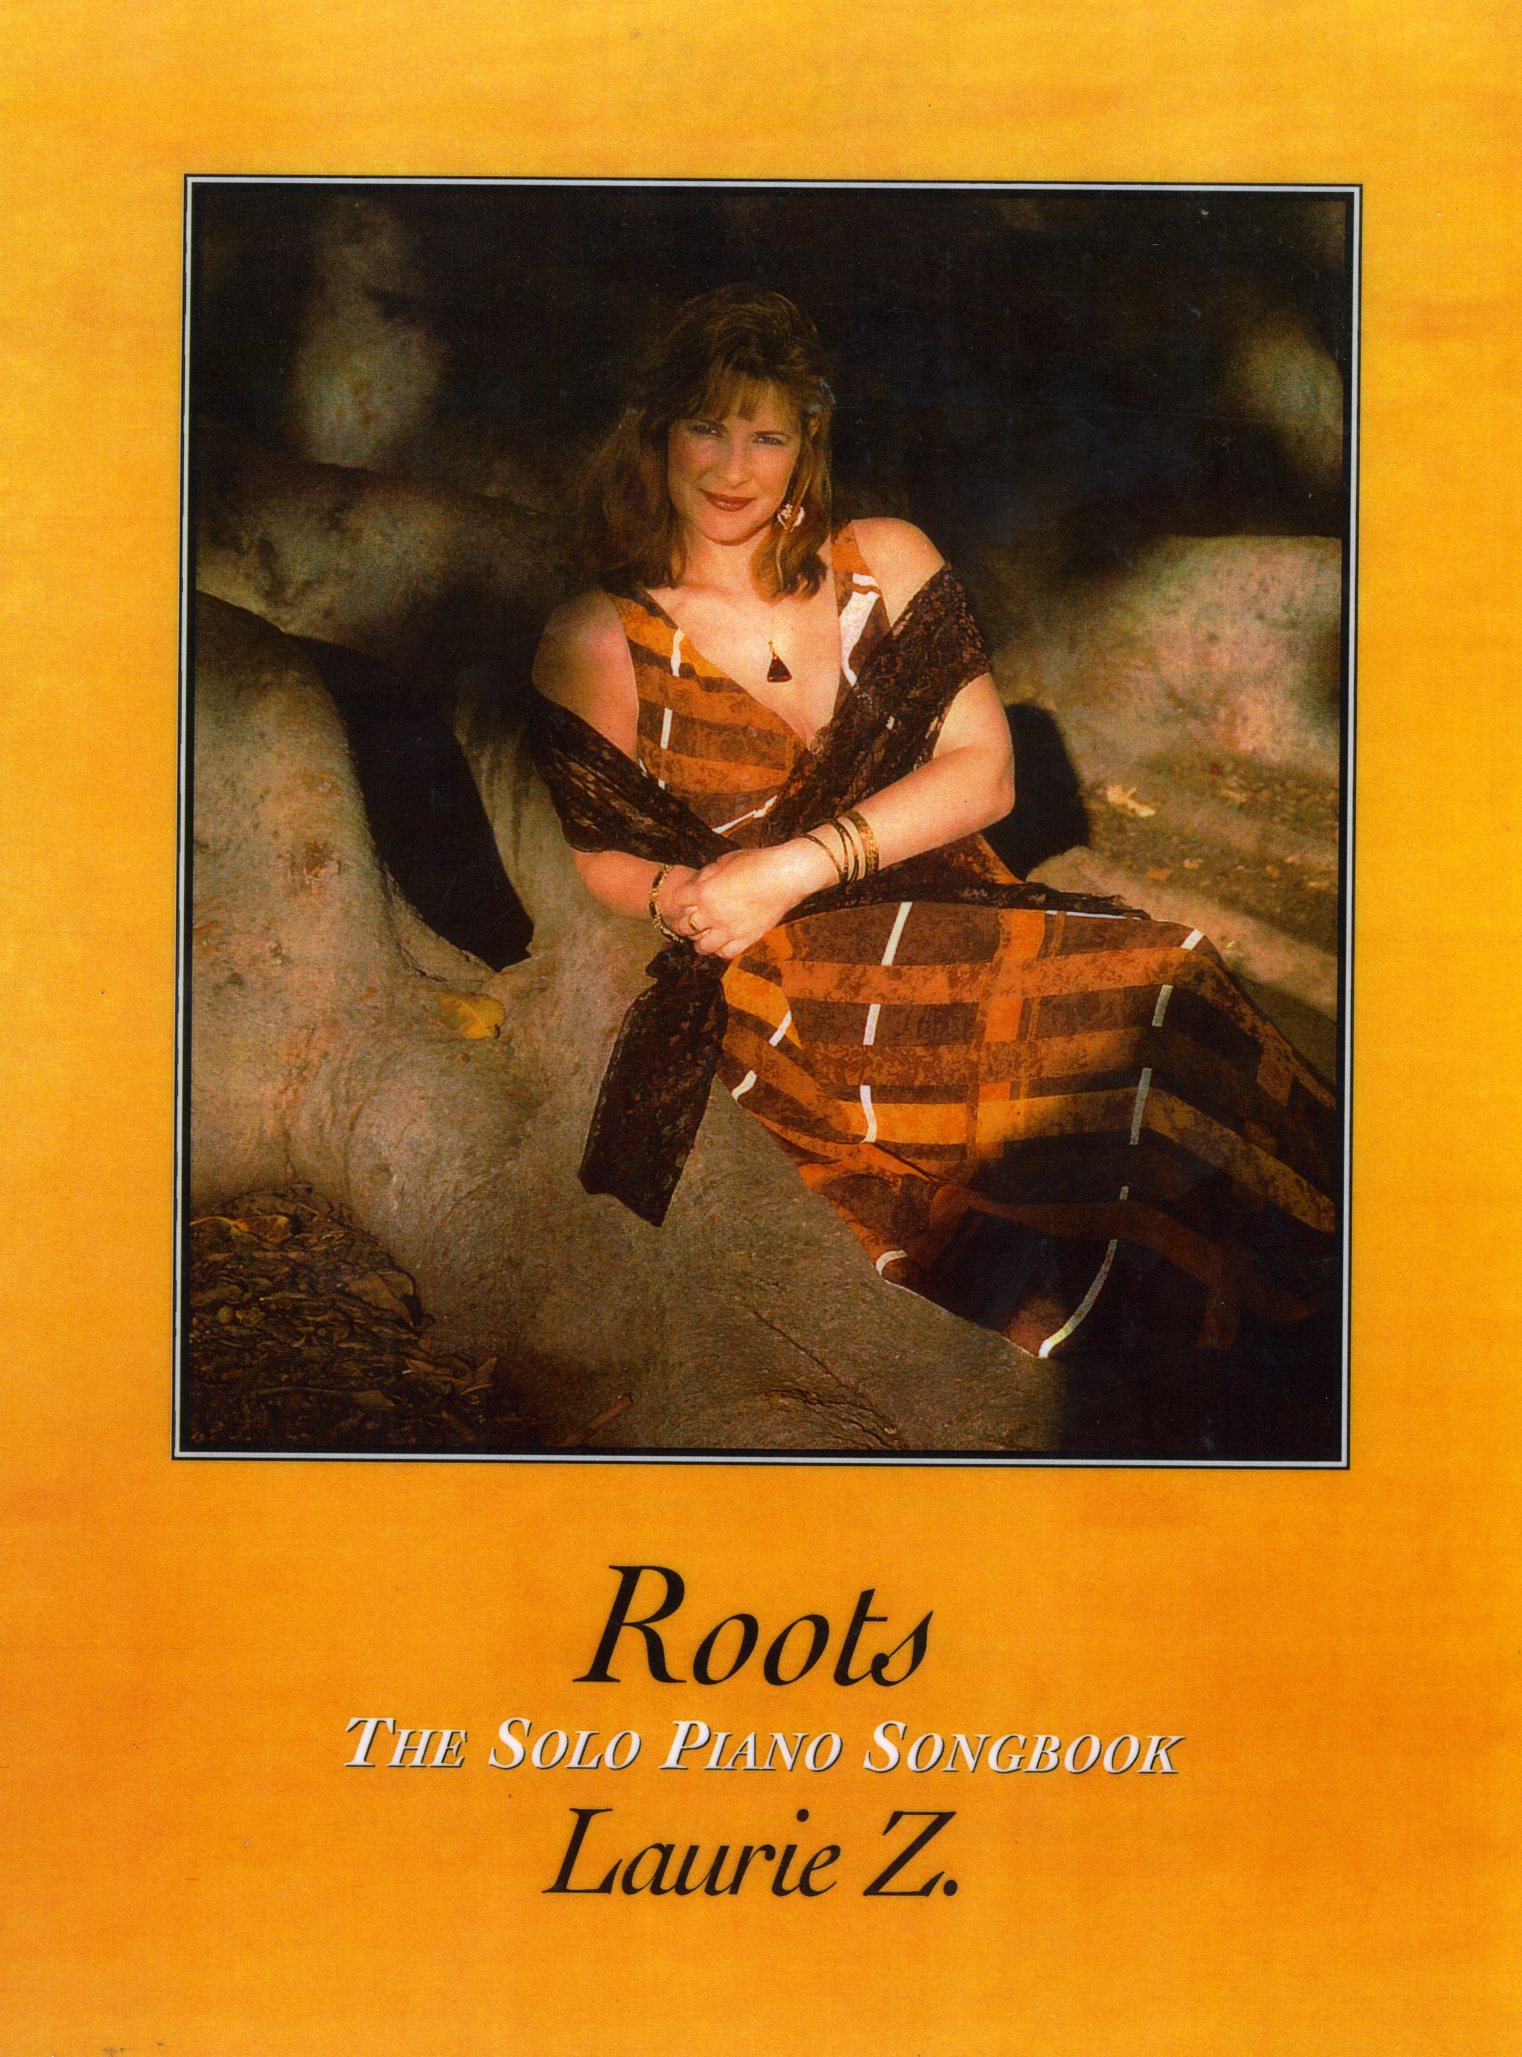 ROOTS THE SOLO PIANO SONGBOOK